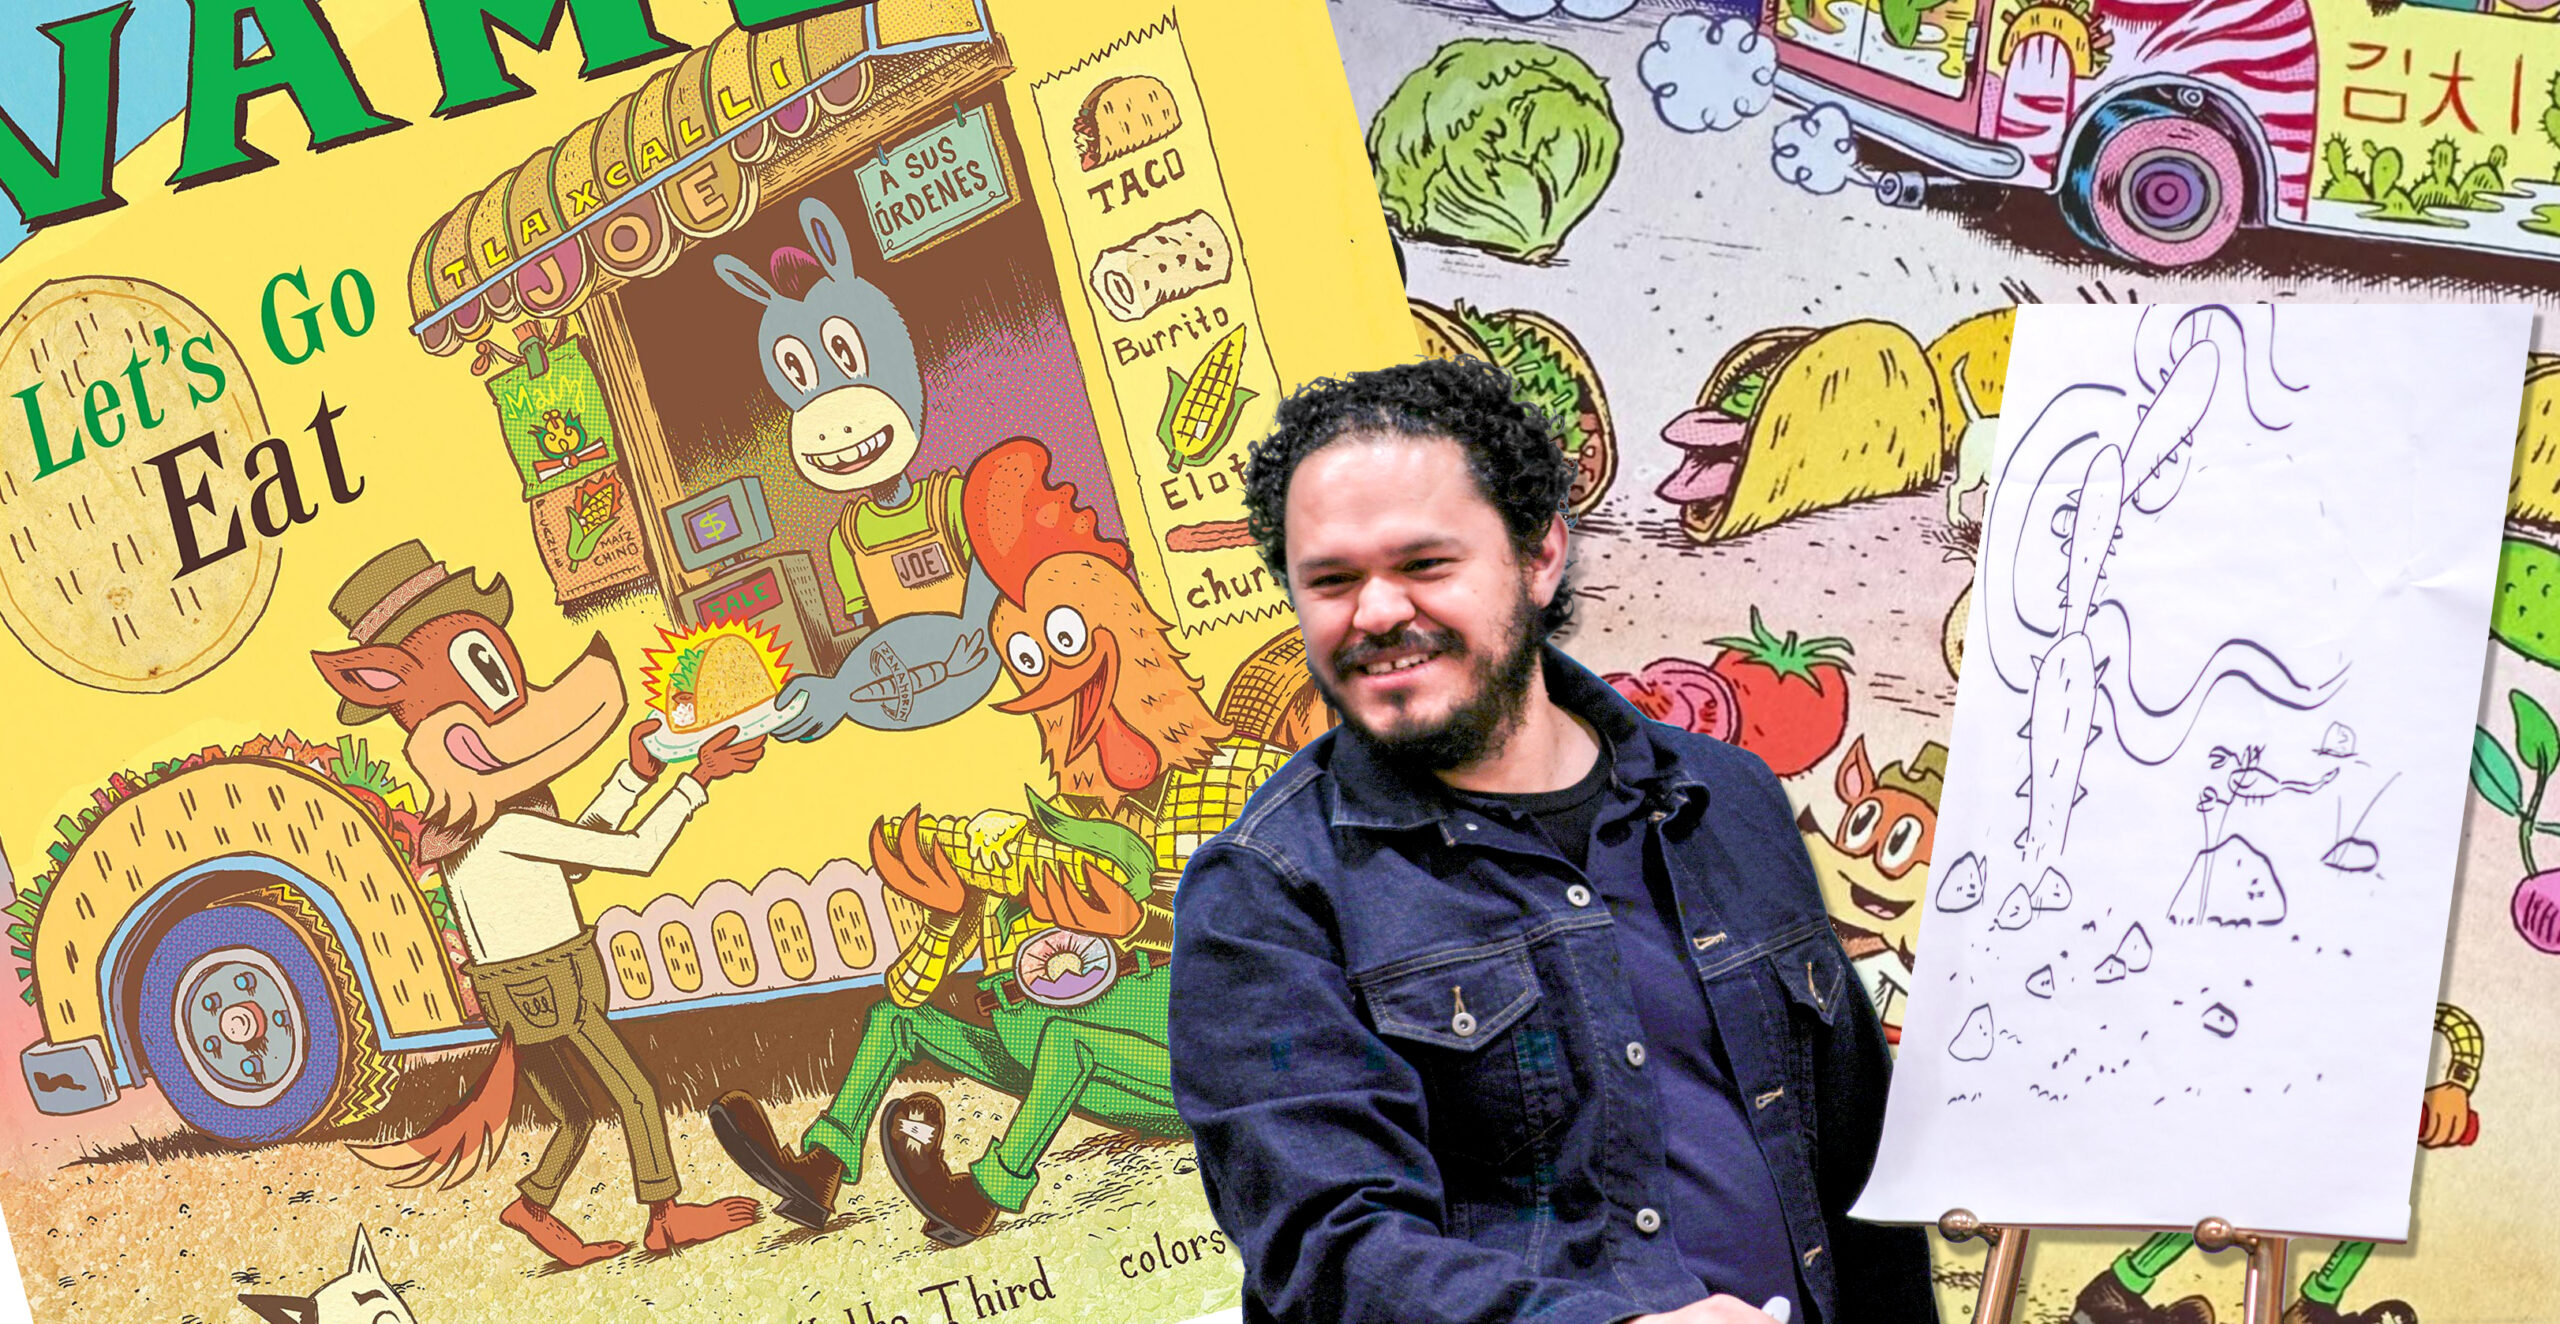 Photo of Raúl The Third, a New York Times bestselling and three-time Pura Belpre award-winning illustrator, author, and artist living in Boston. He is seated at an easel while drawing. Behind him is a collage of colorful artwork from his book, Vamos! Let’s go Eat.